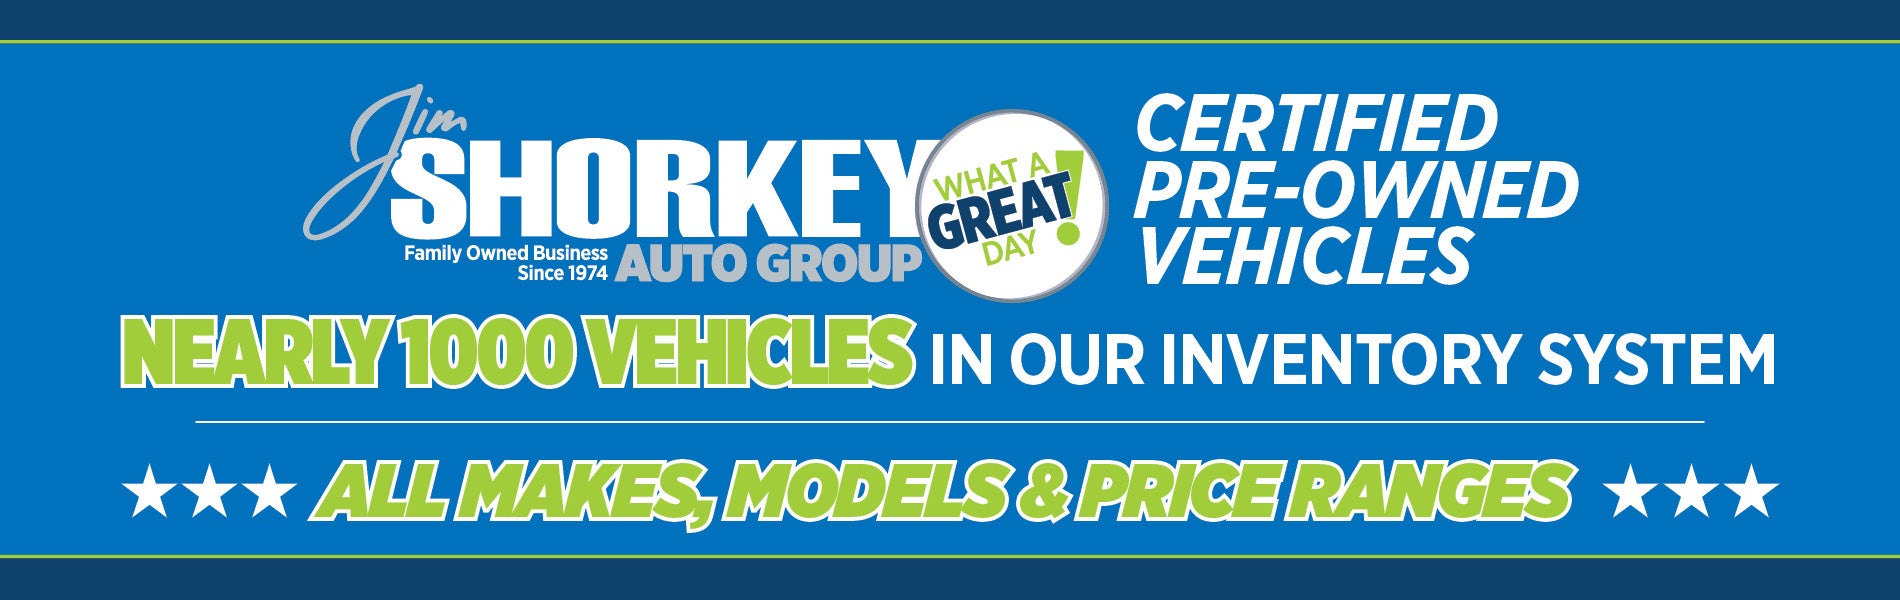 certified pre owned vehicles available